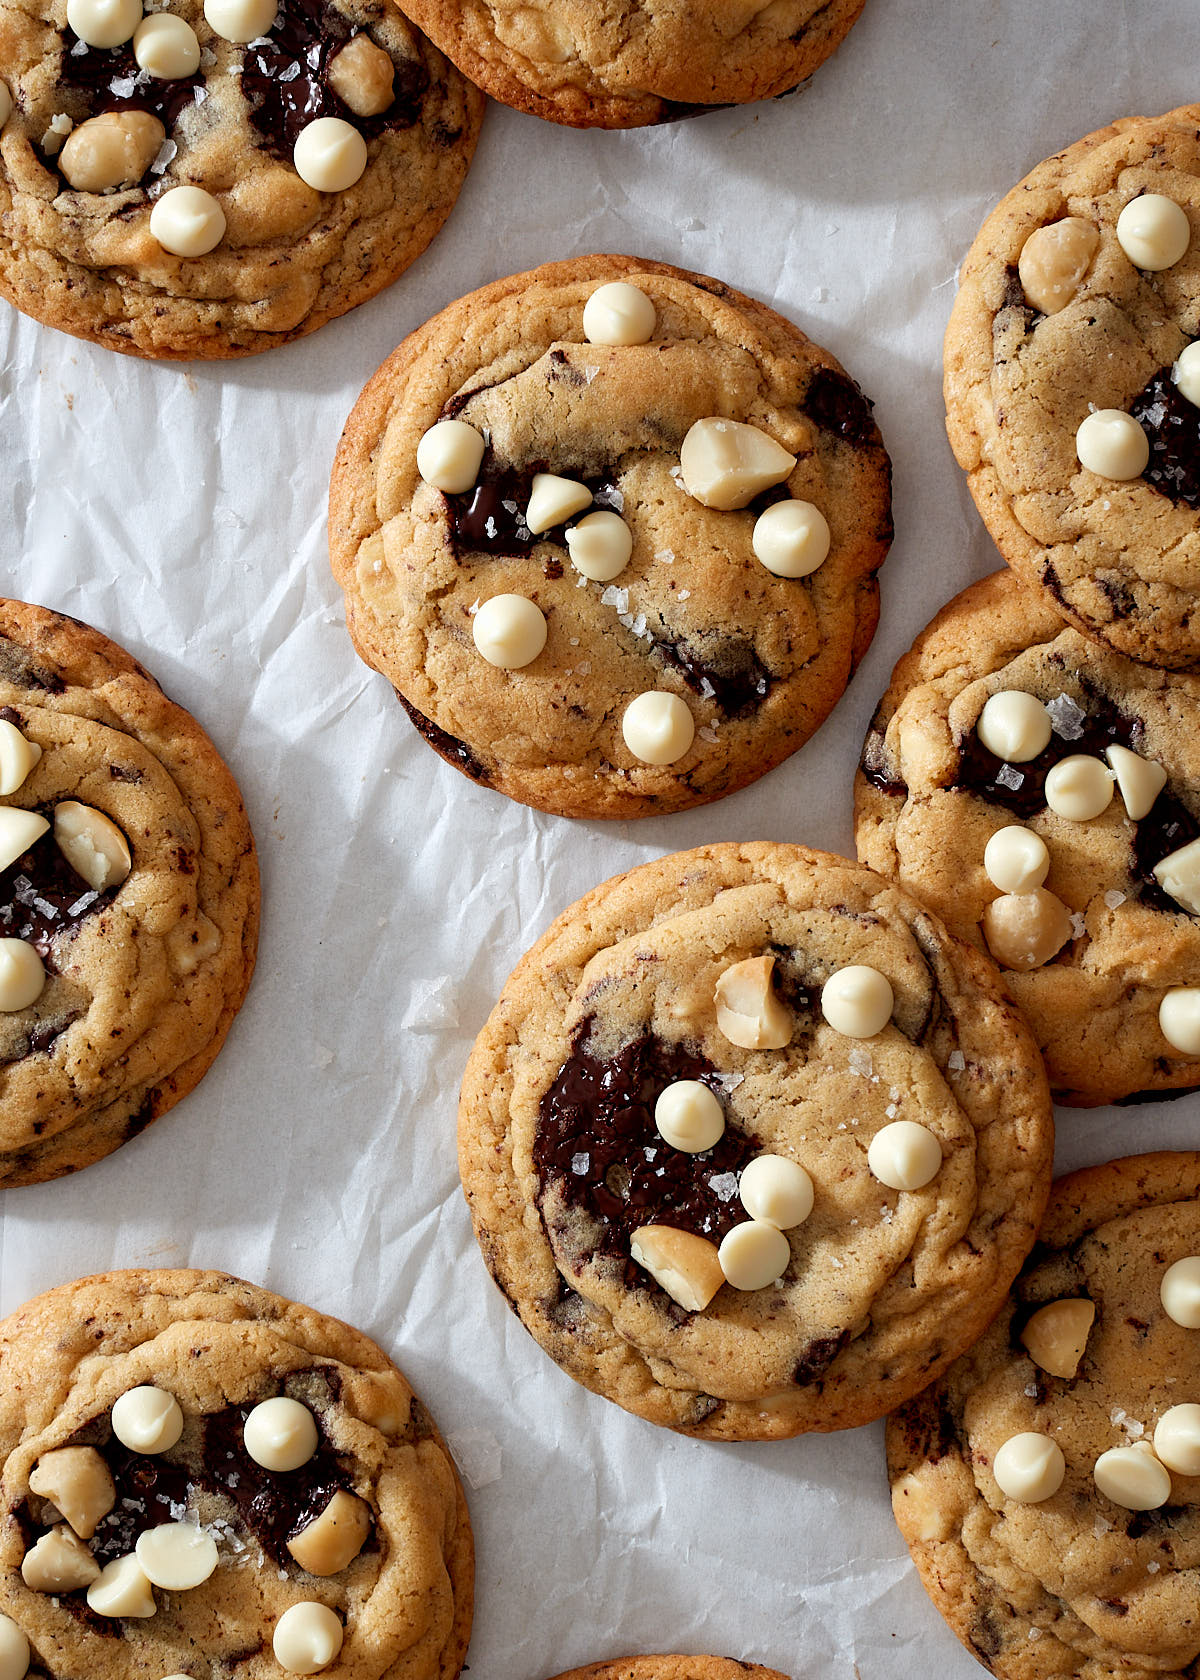 Chocolate macadamia nut cookies with dark and white chocolate chips on parchment paper.